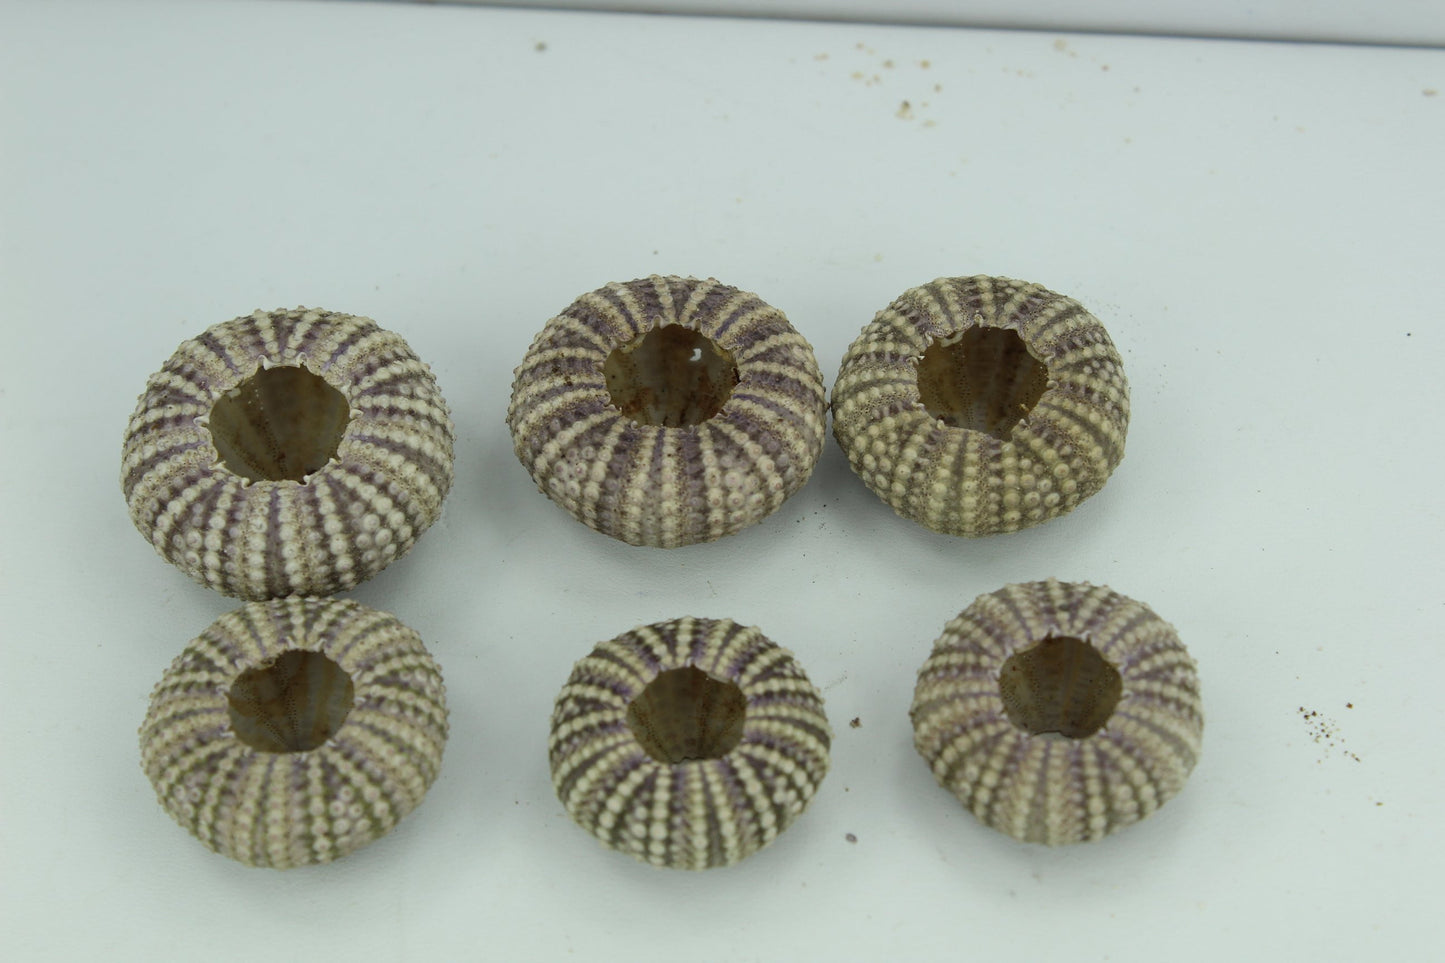 Florida Natural 6 Baby Sea Urchins Estate Collection Jewelry Shell Art Collectibles unusual